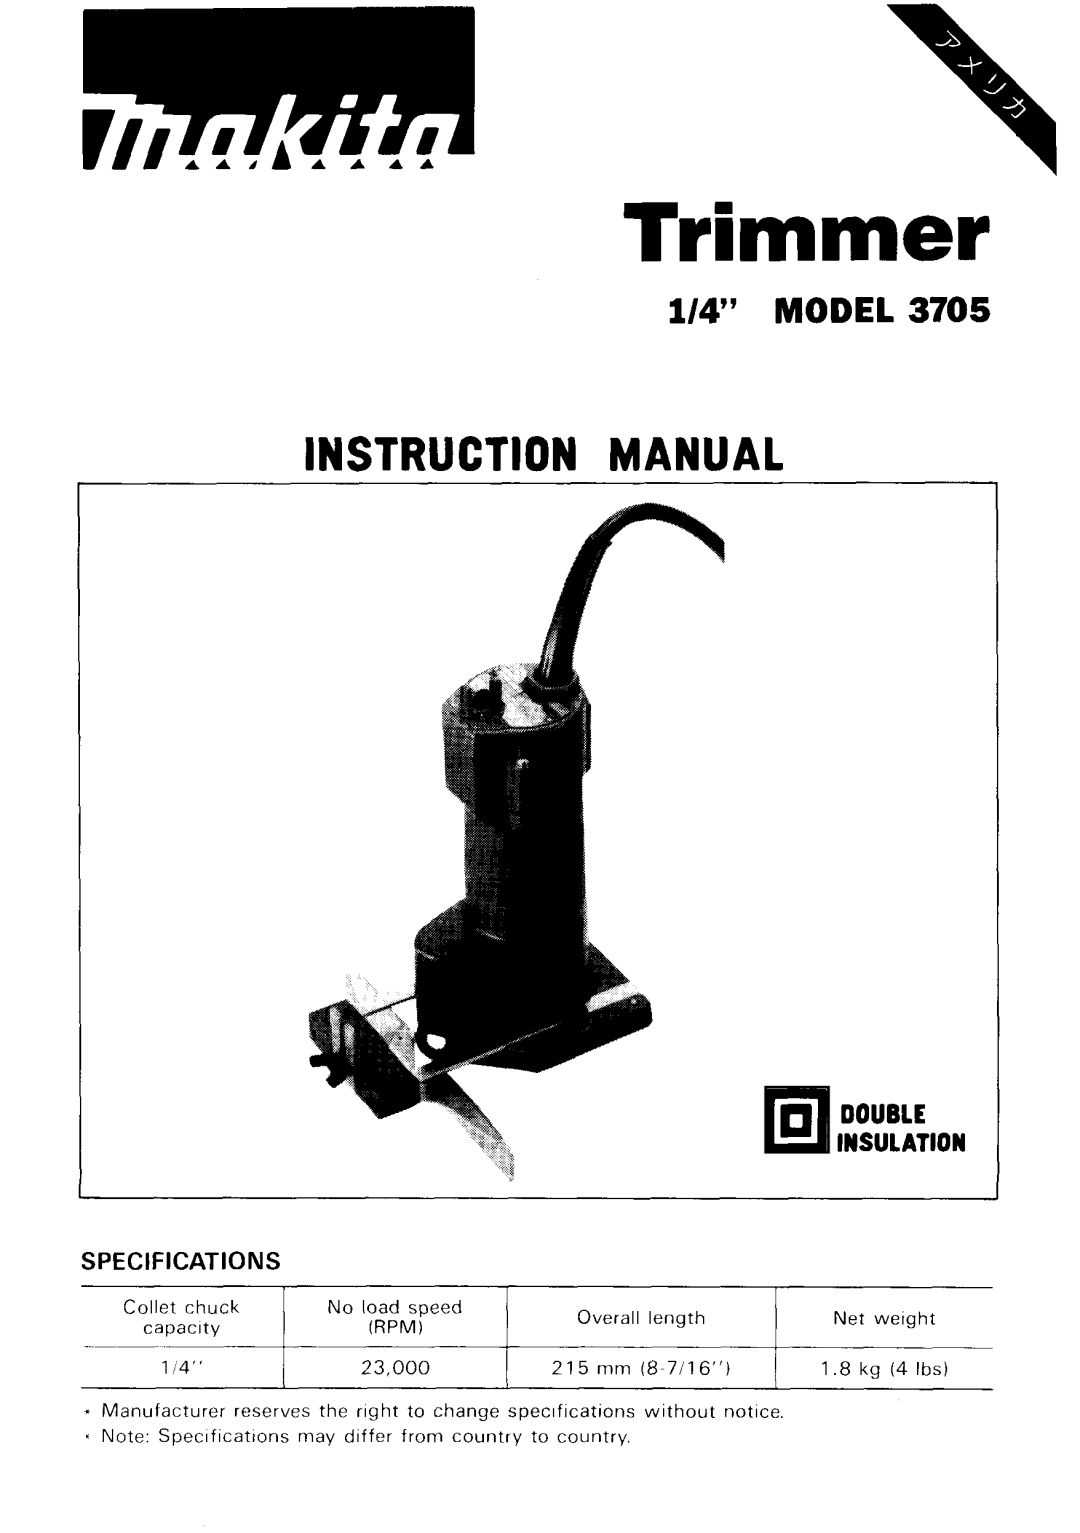 Makita 3705 instruction manual 1/4 MODEL, Double Insulation, Specifications, Trimmer, 2 1 5 mm 8 7/16, 23,000 